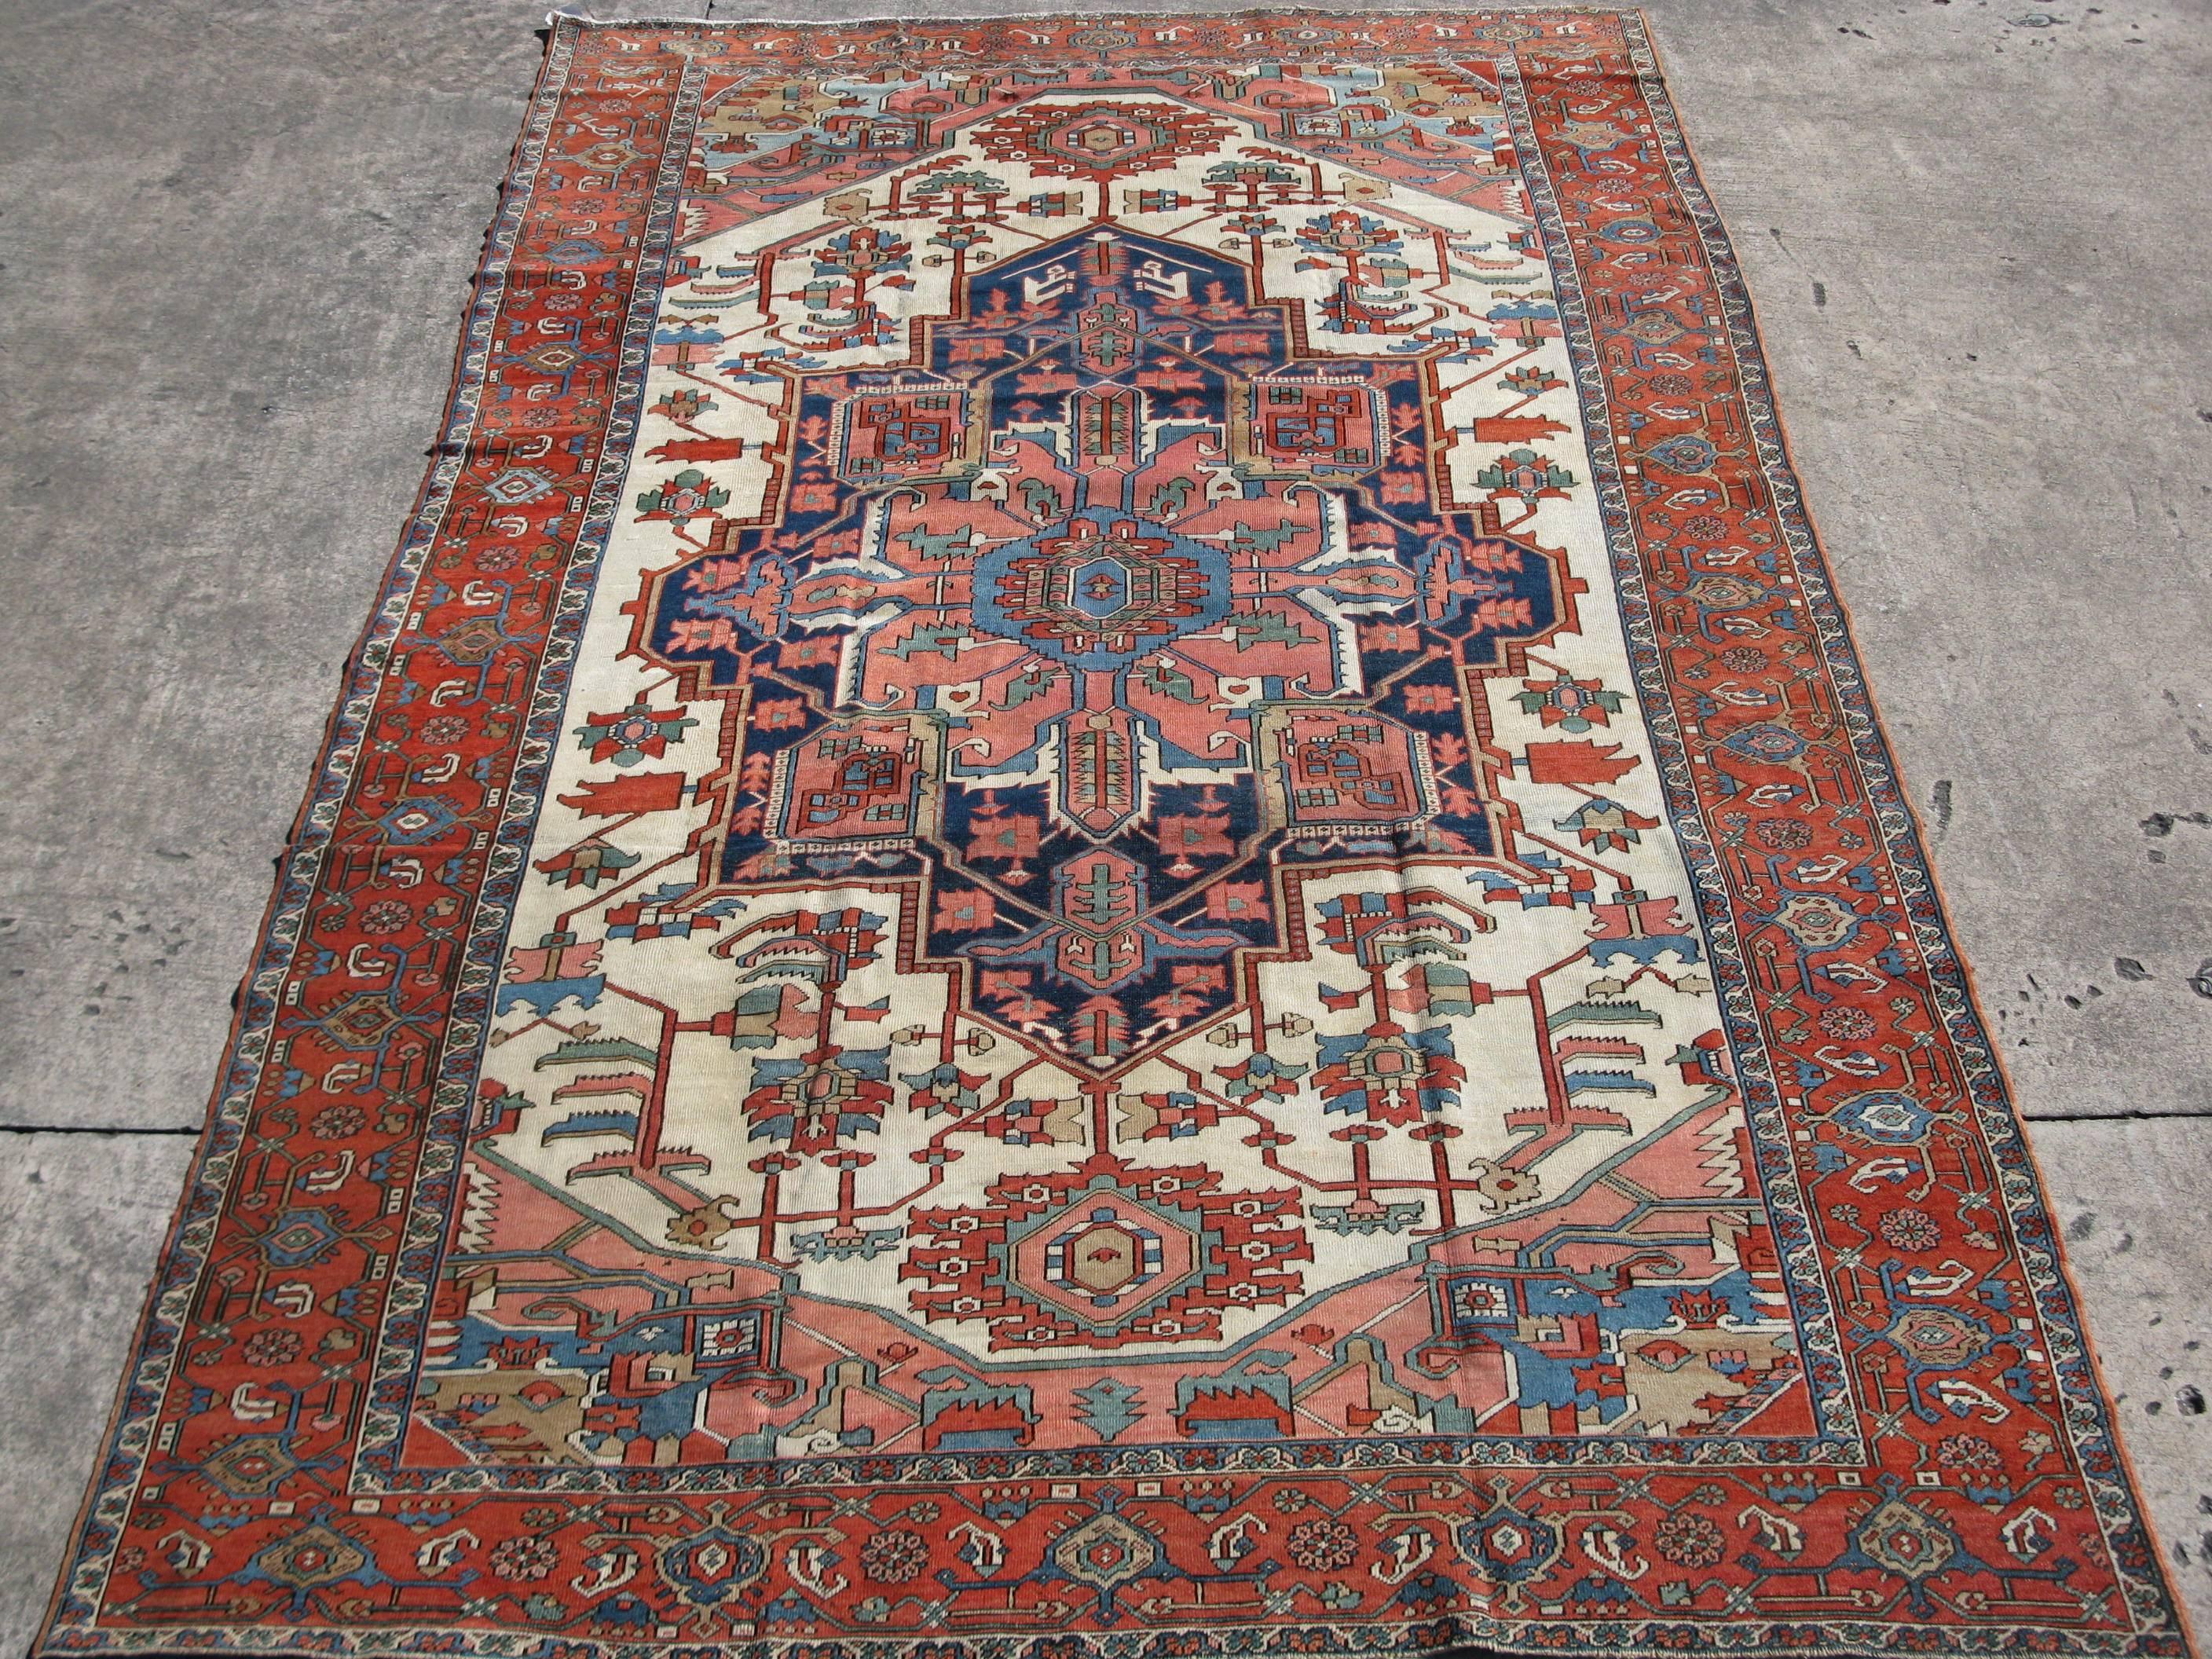 This is a fantastic hand-knotted antique Persian Serapi rug. It has a hard to find size with a very fine weave. It measures 8' 4'' x 13' 6'' and is in excellent condition.